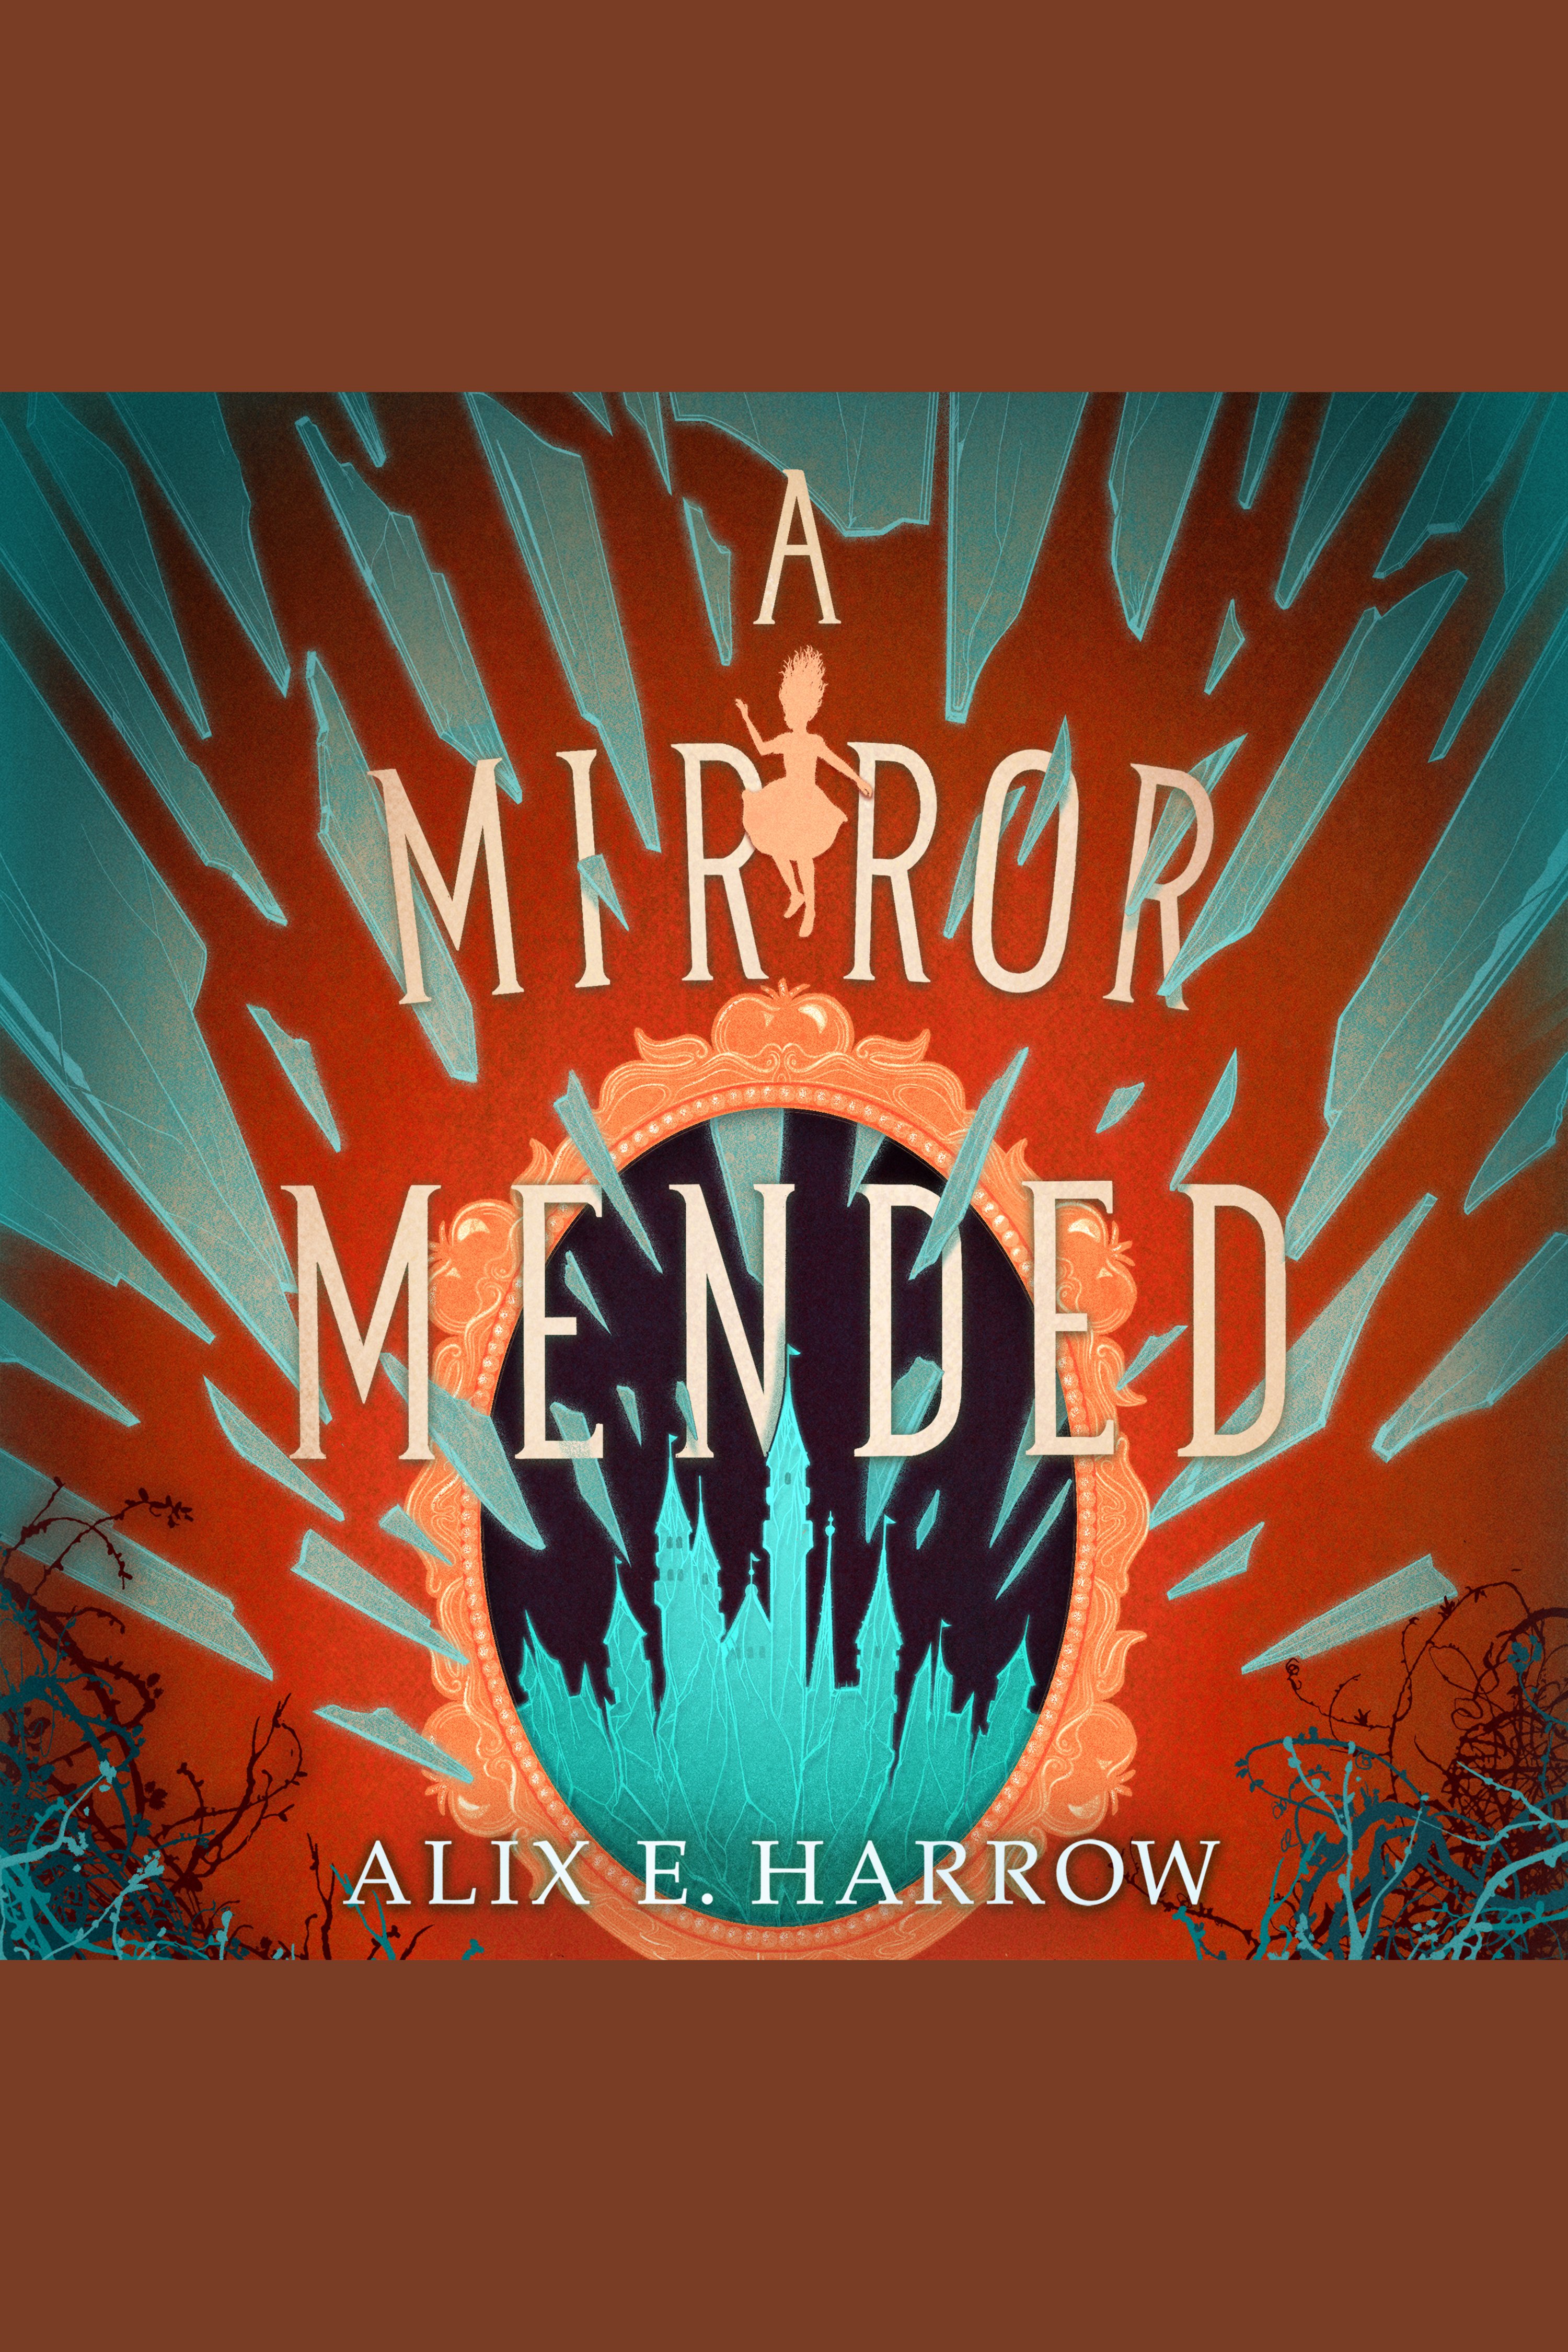 A mirror mended